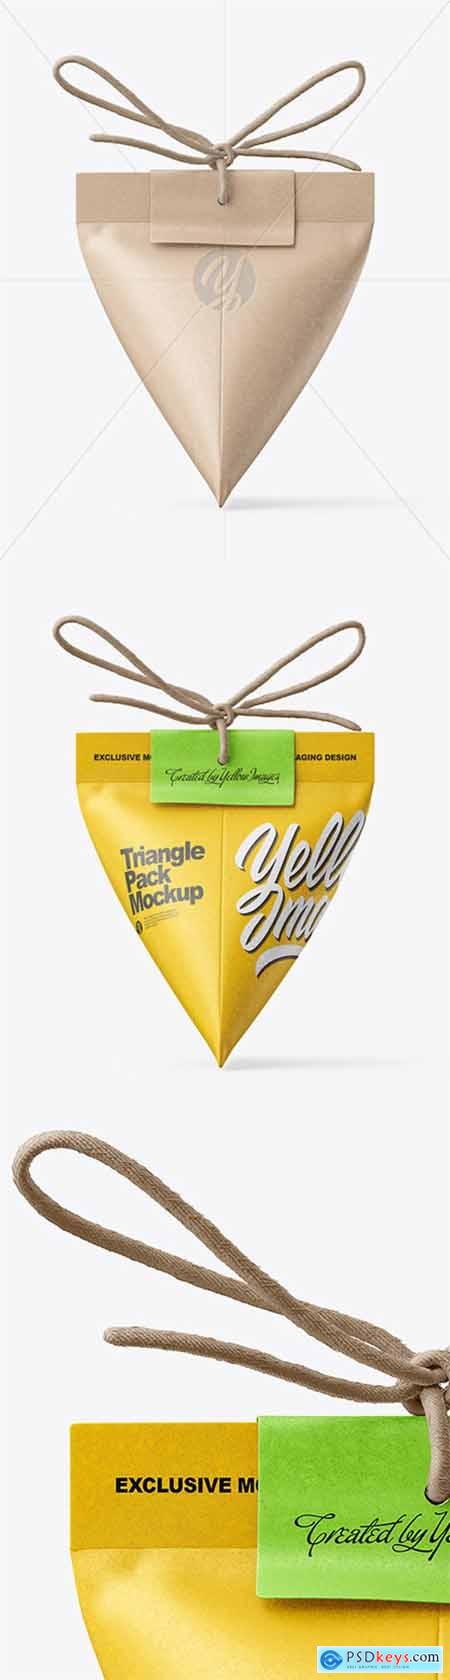 Triangle Kraft Paper Pack With Rope Bow Mockup 64556